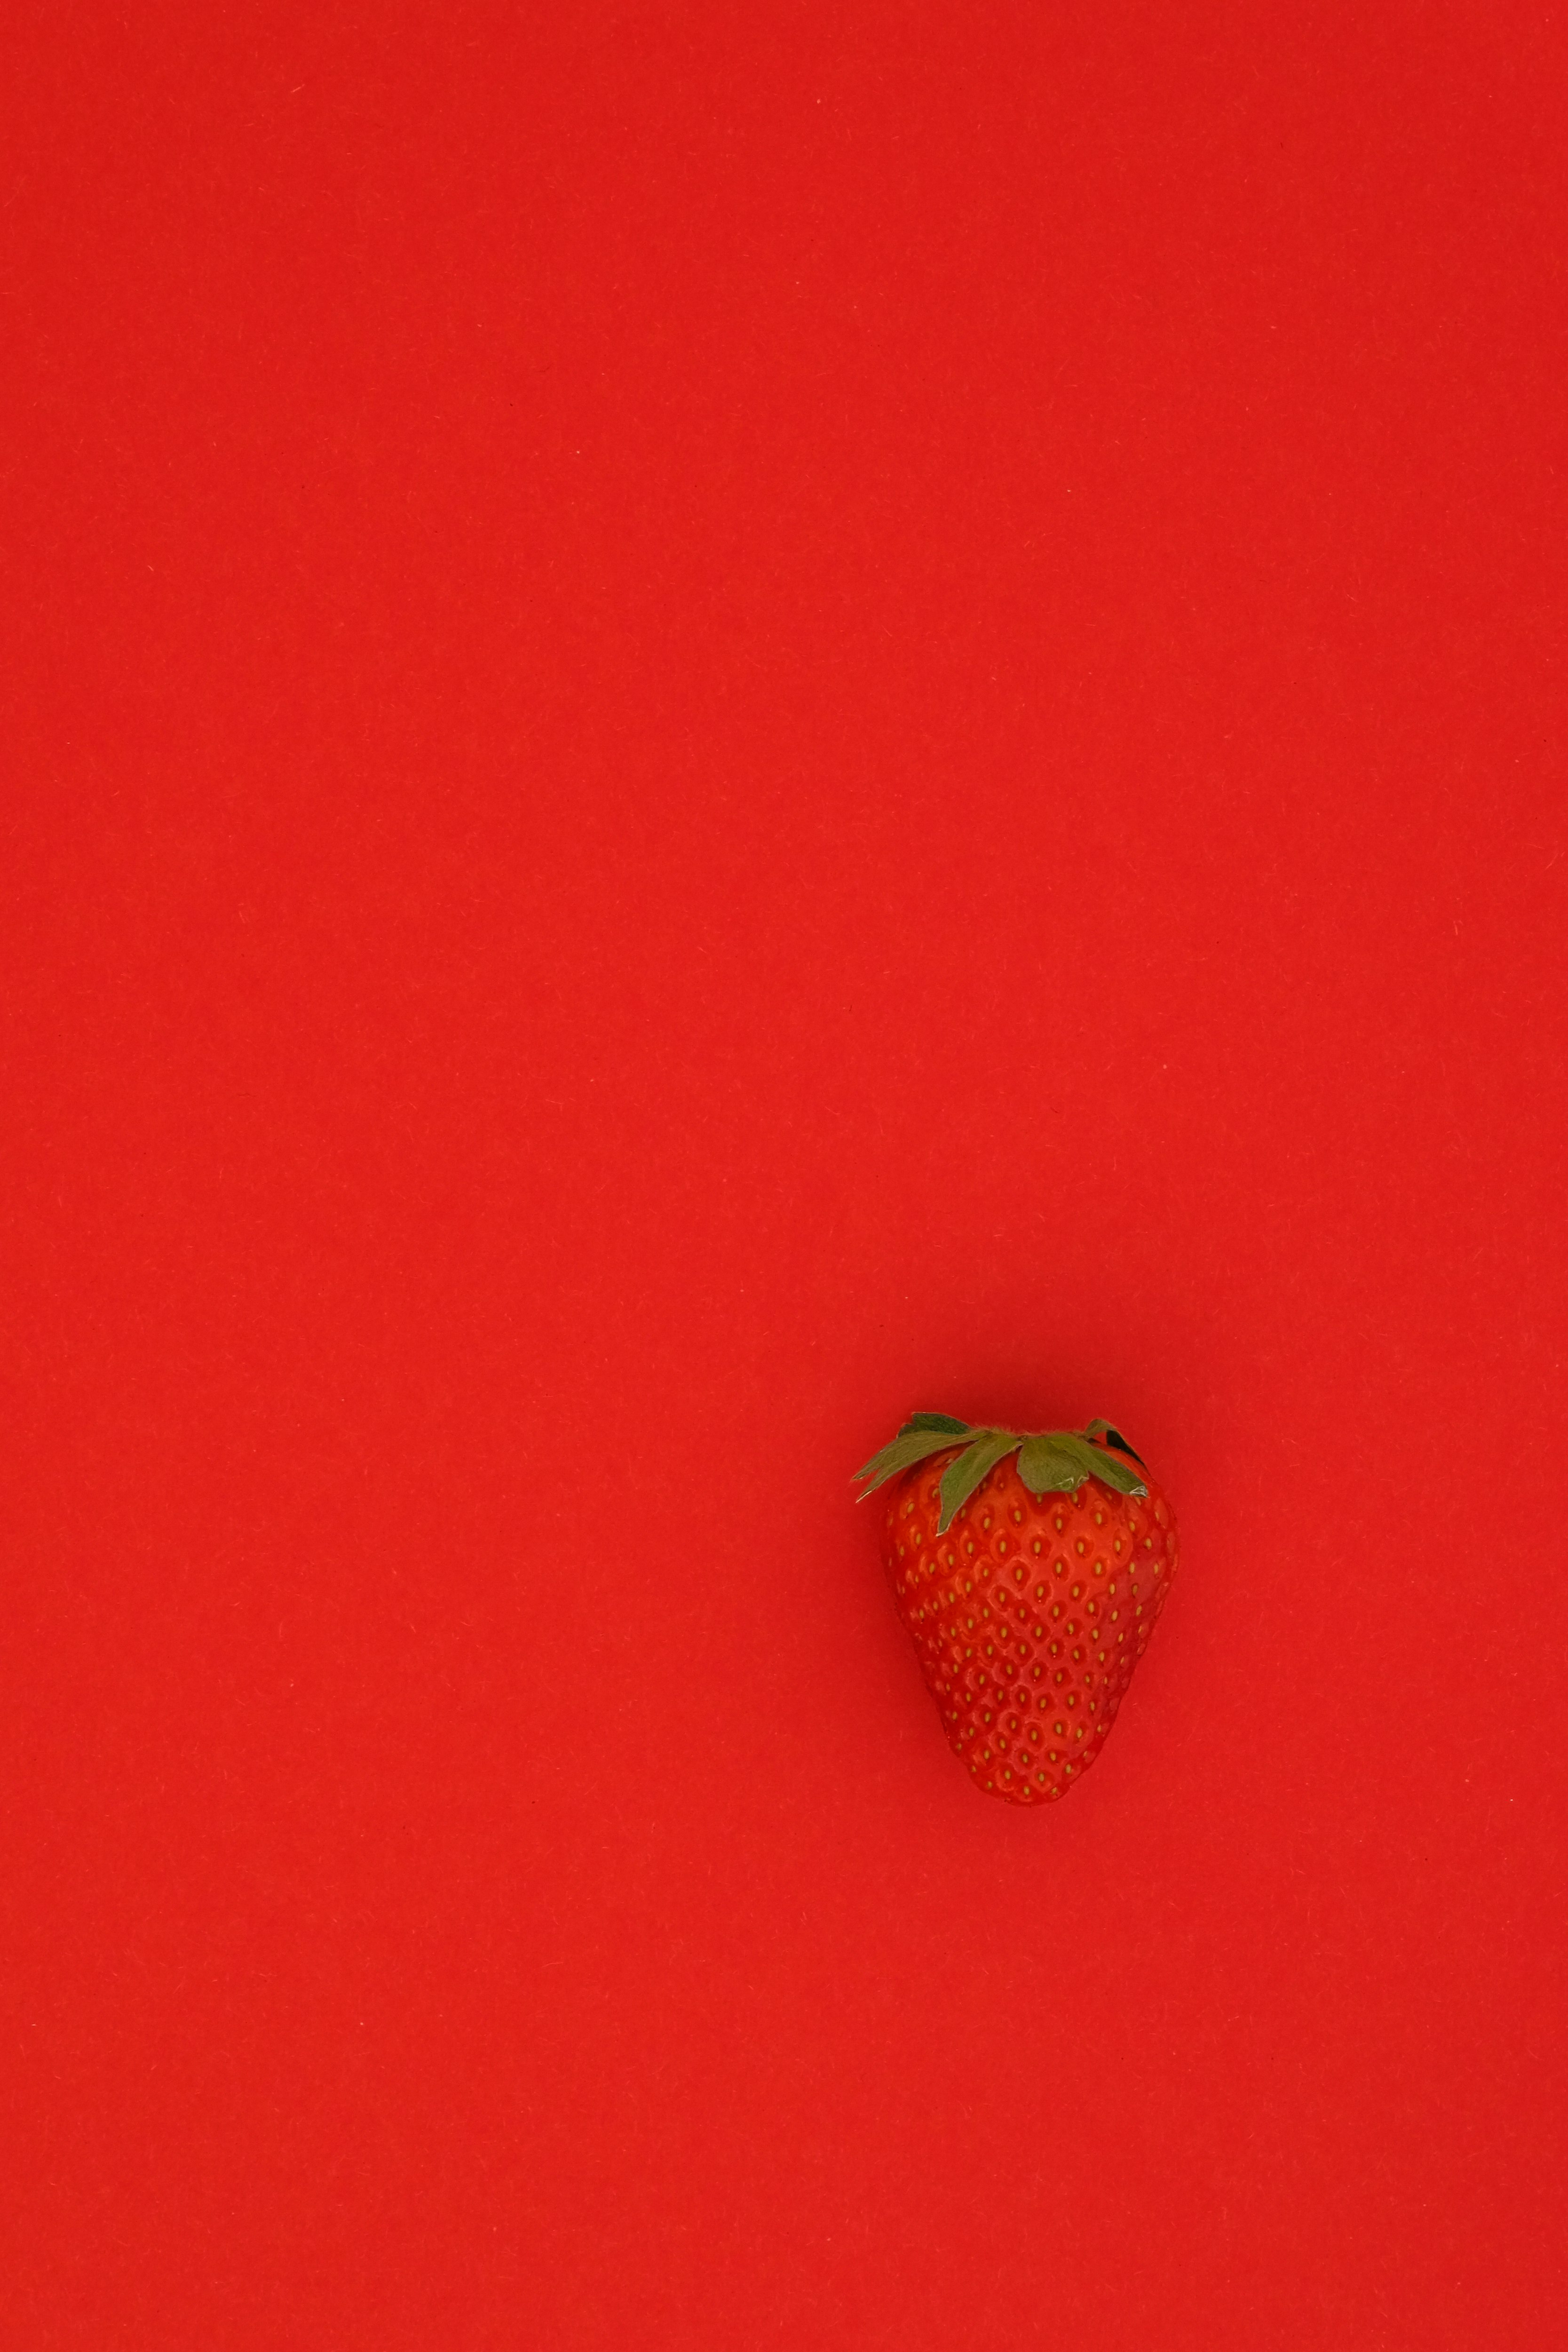 red strawberry fruit on red surface